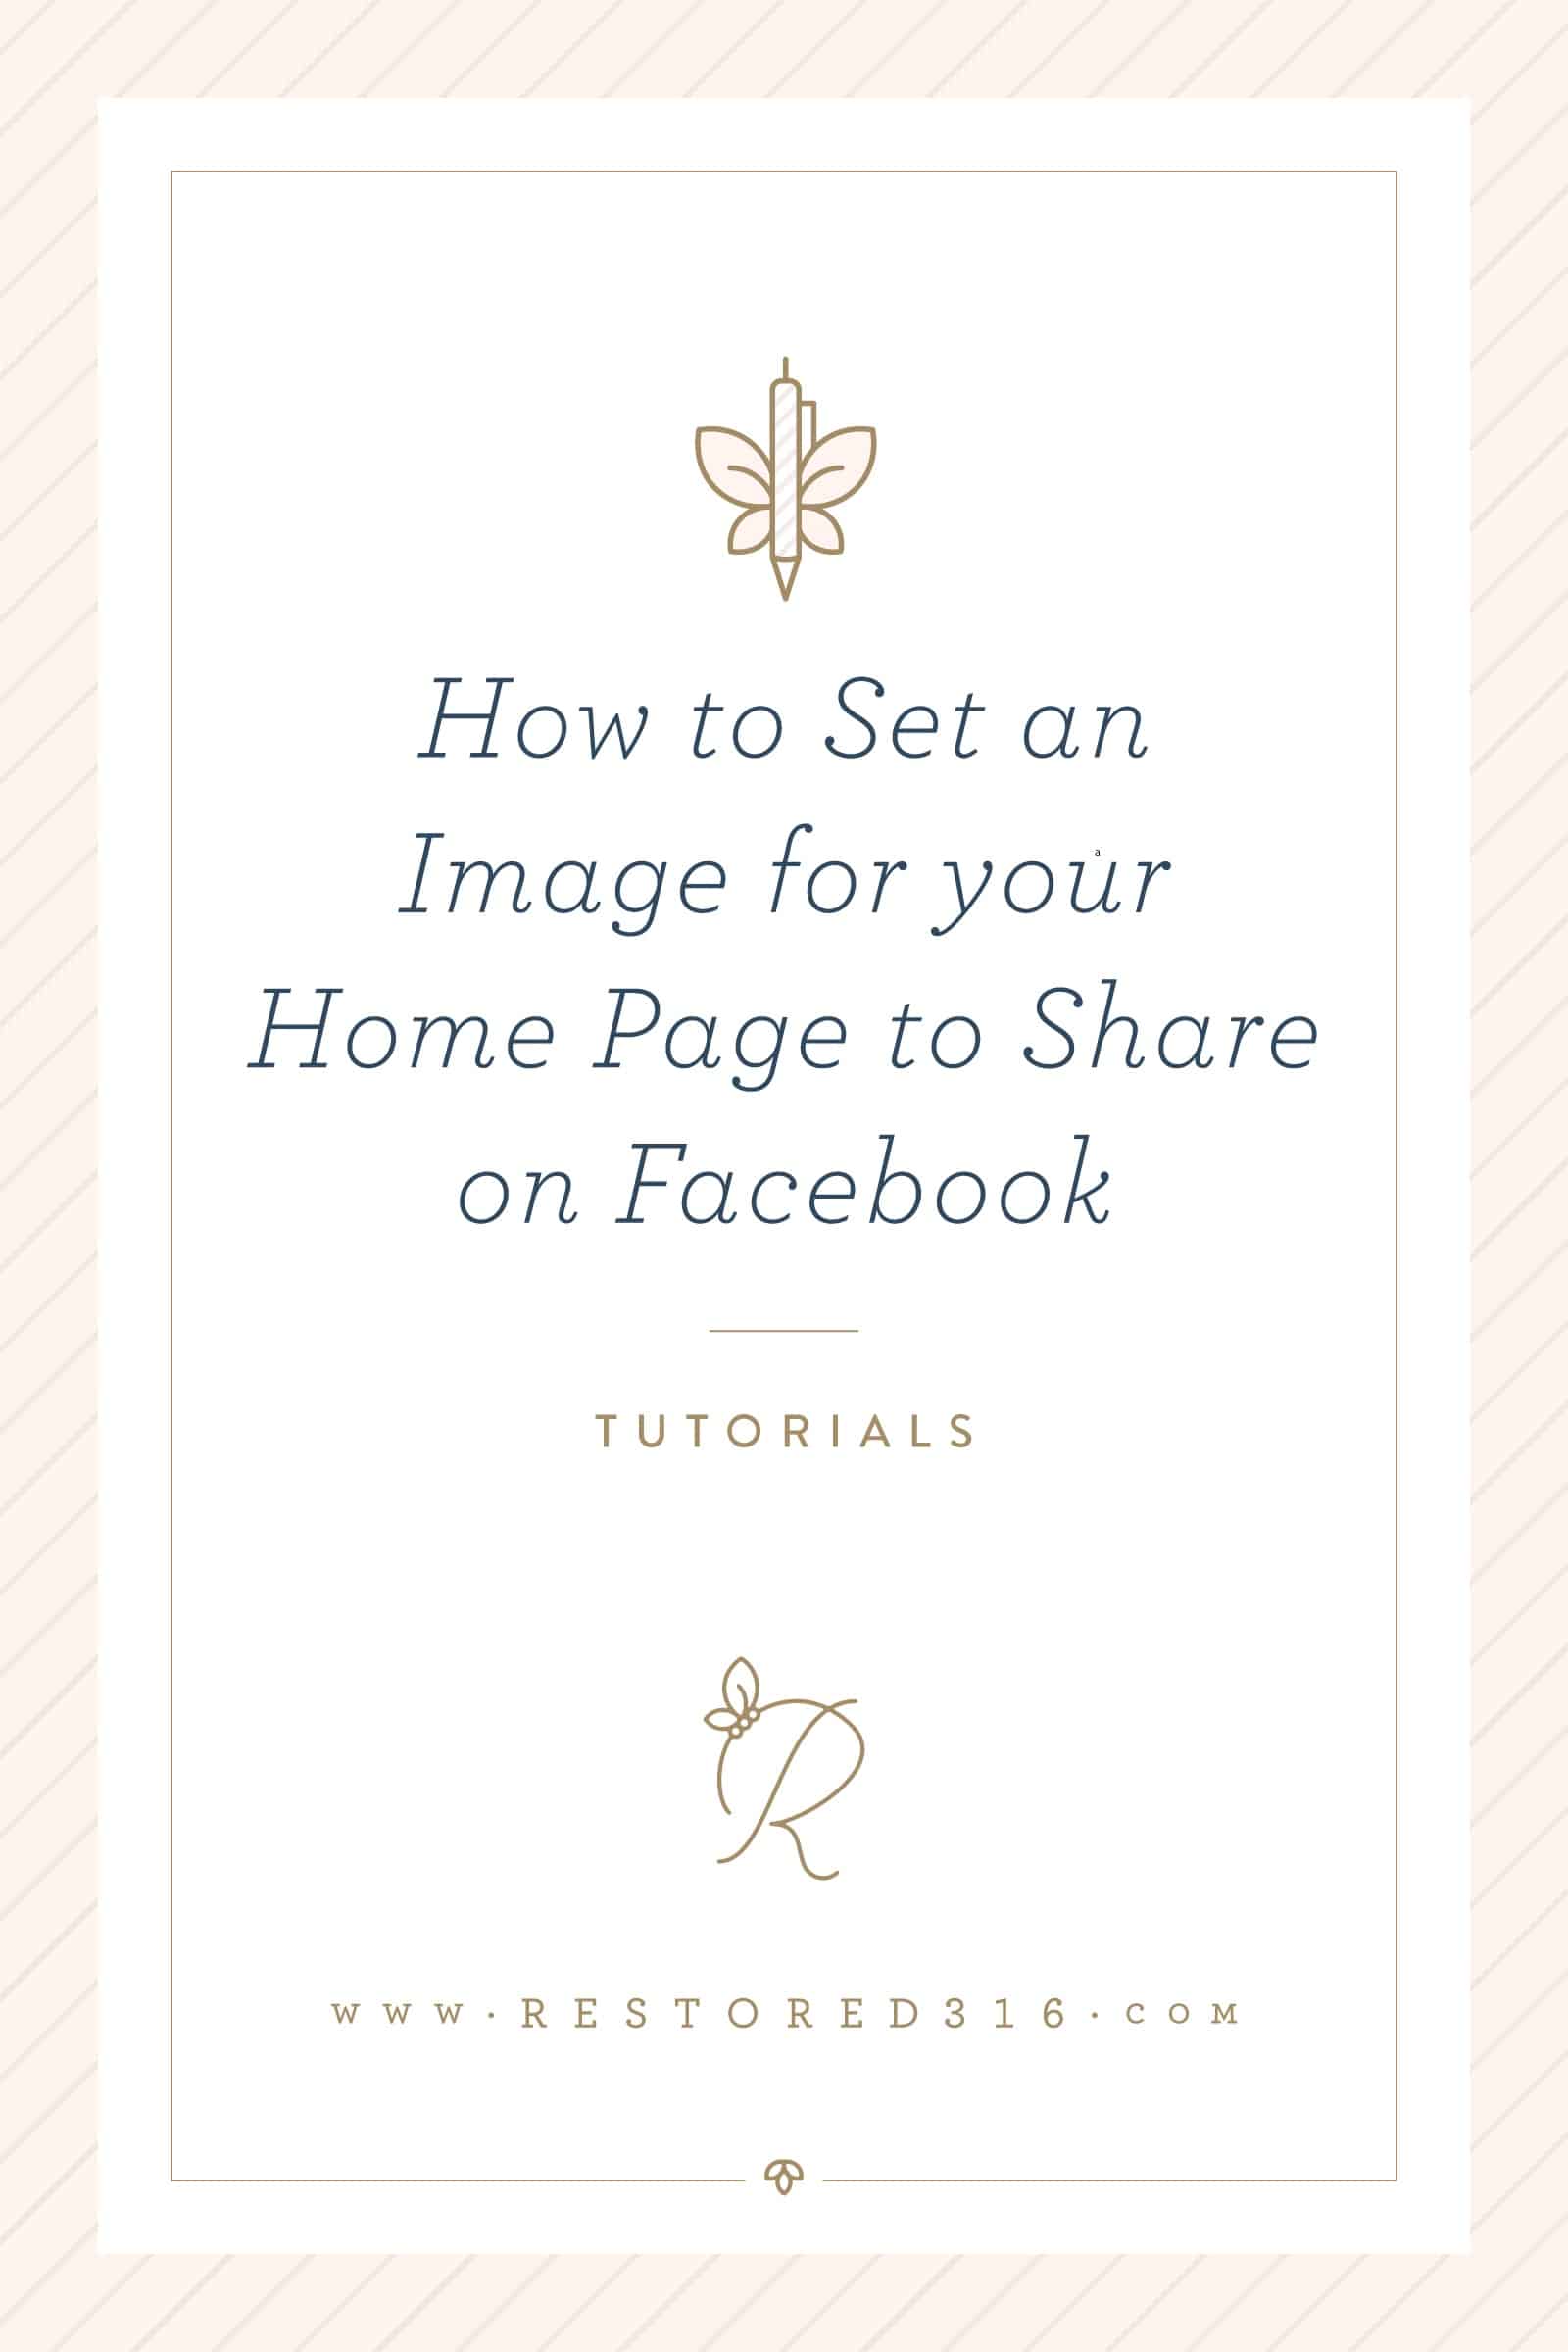 How to Set an Image for the Home Page of Your Site for Facebook Sharing